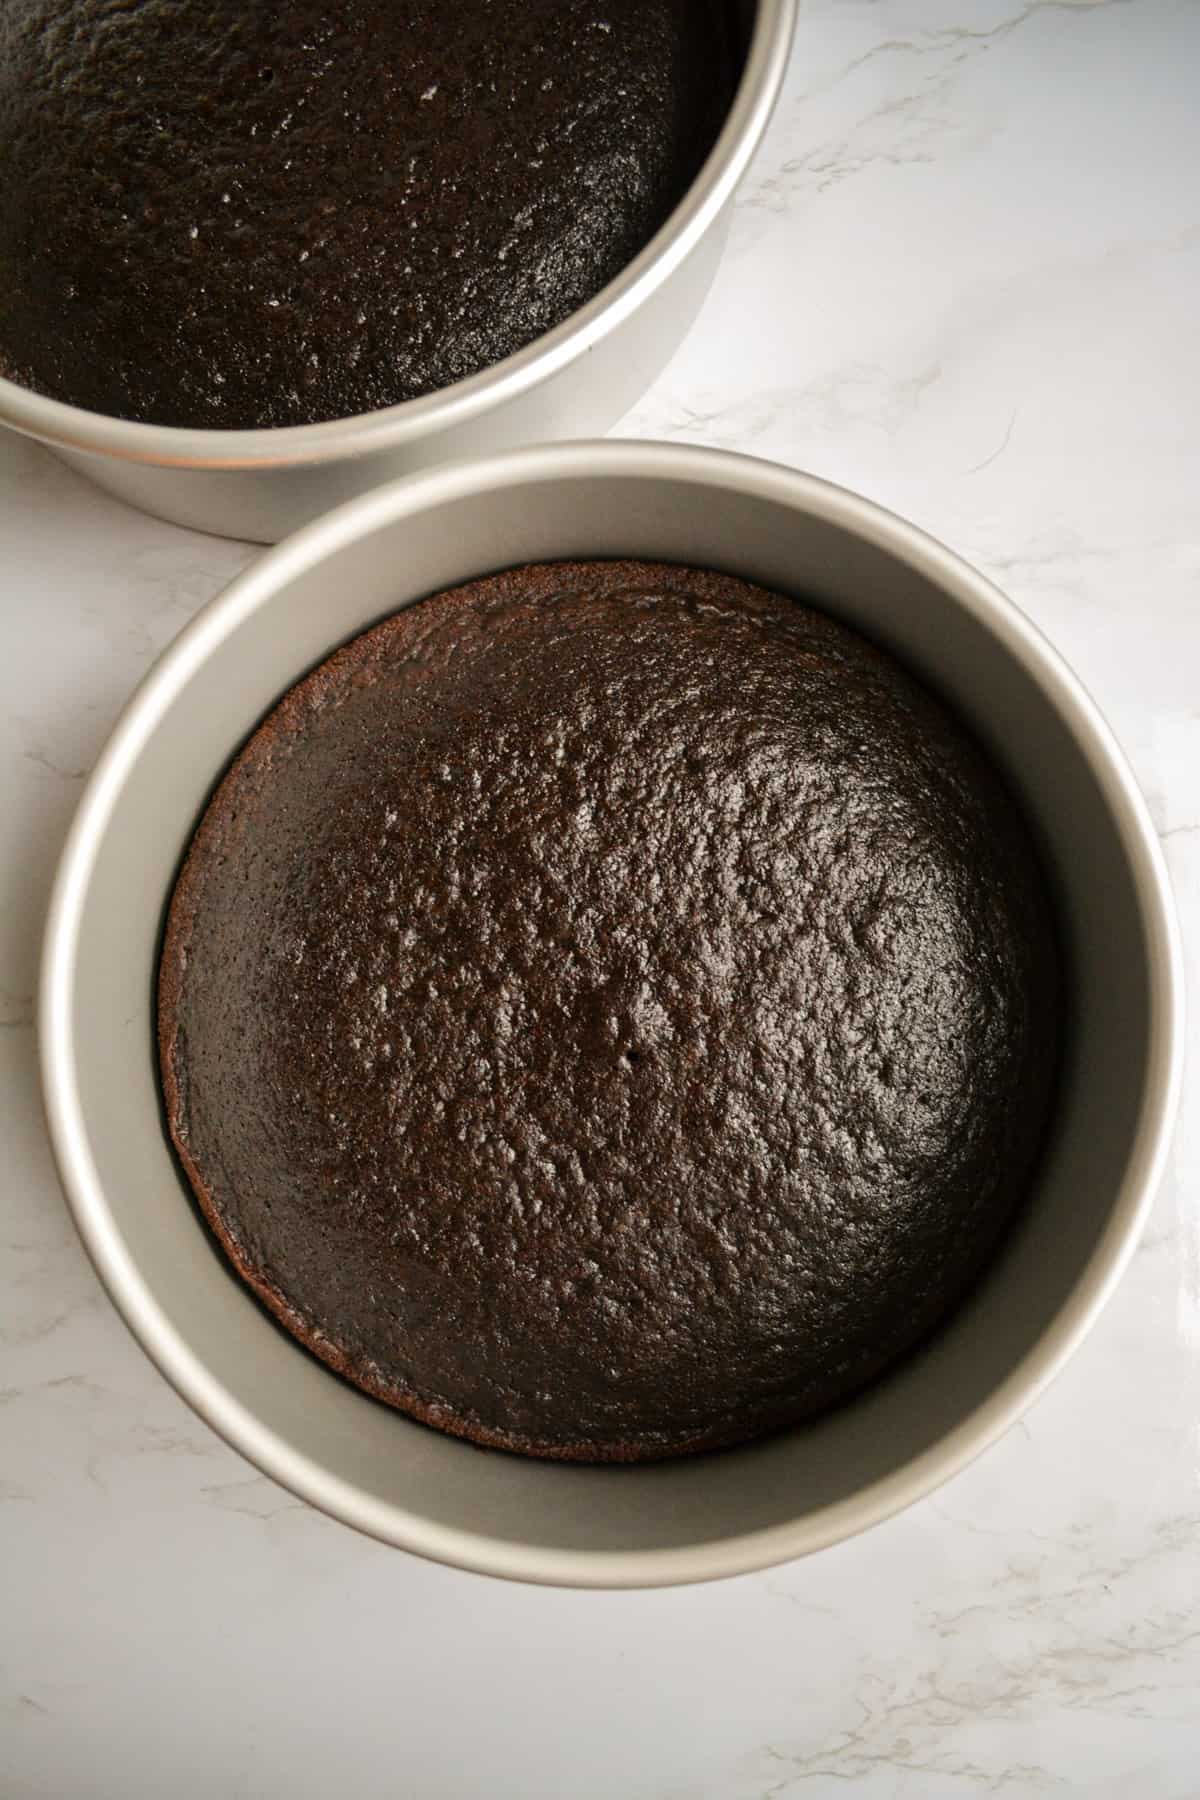 Baked chocolate cakes in  8 inch round cake pans.